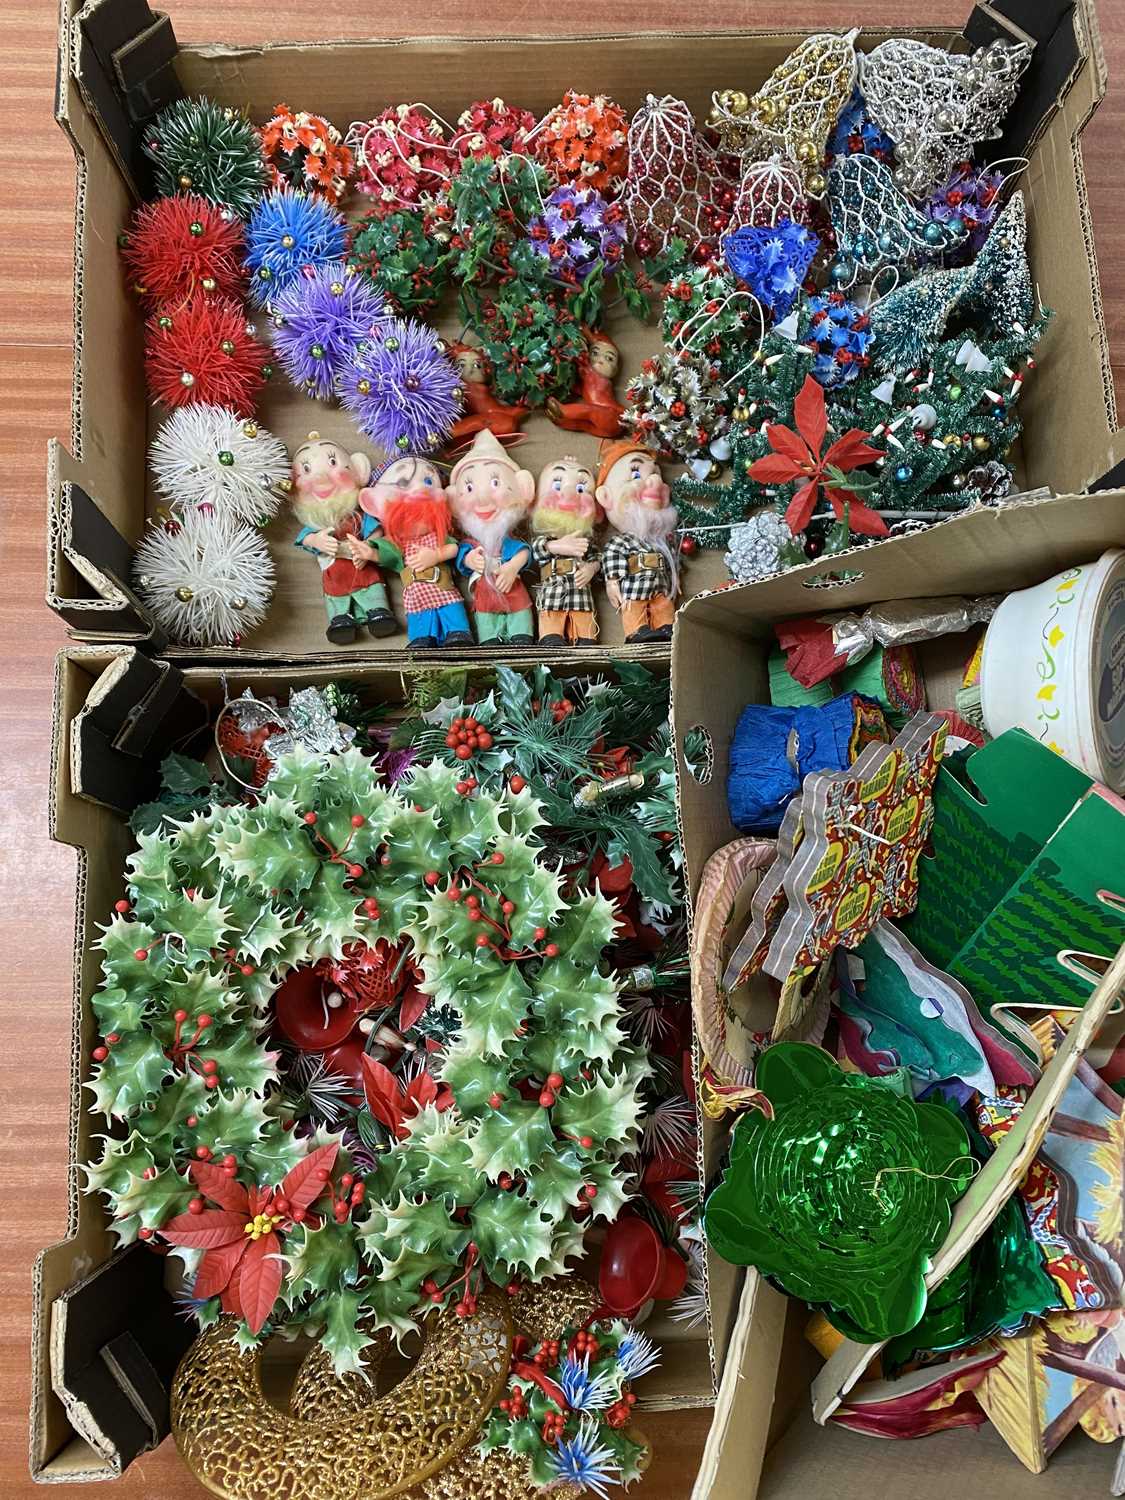 VINTAGE CHRISTMAS DECORATIONS - mid-century honeycomb paper decorations and streamers, figures to - Image 2 of 2